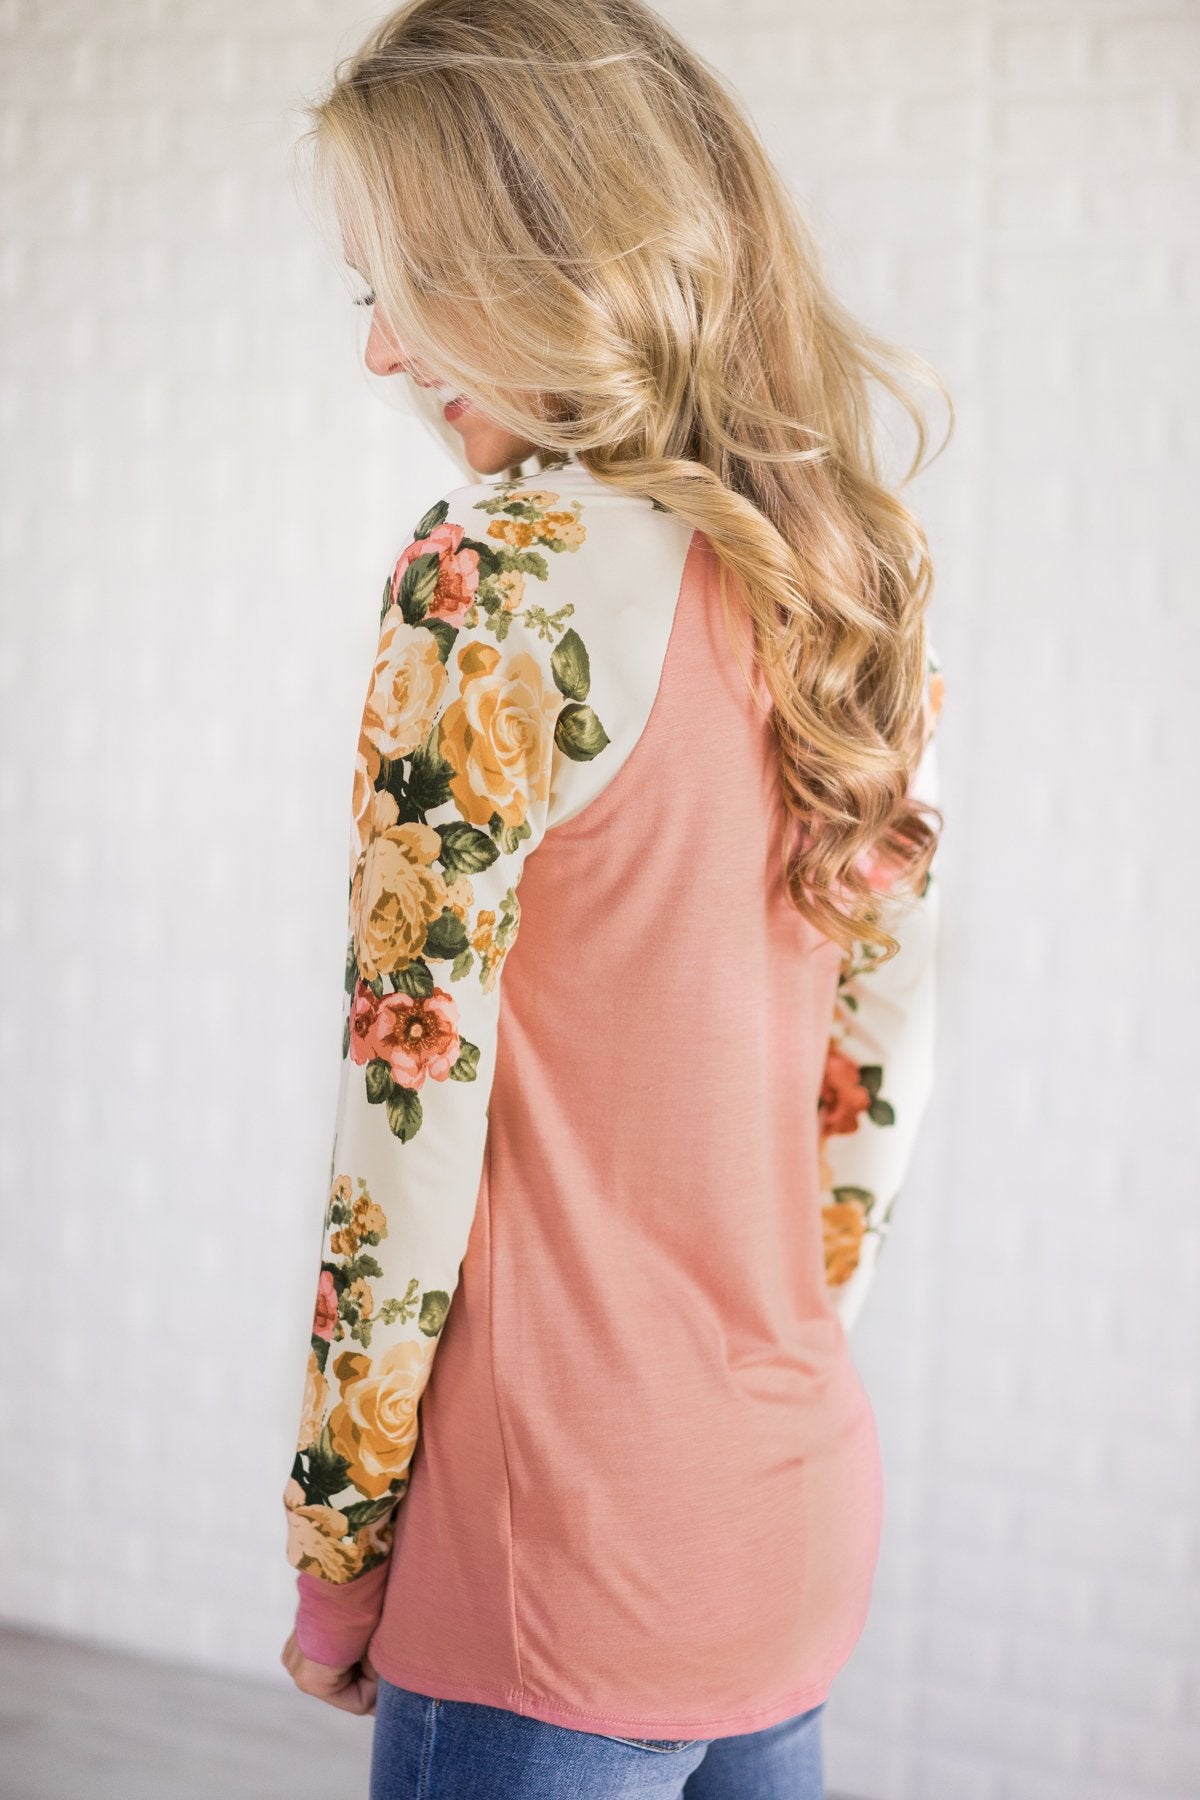 The One for Me Floral Sleeve Pink Top